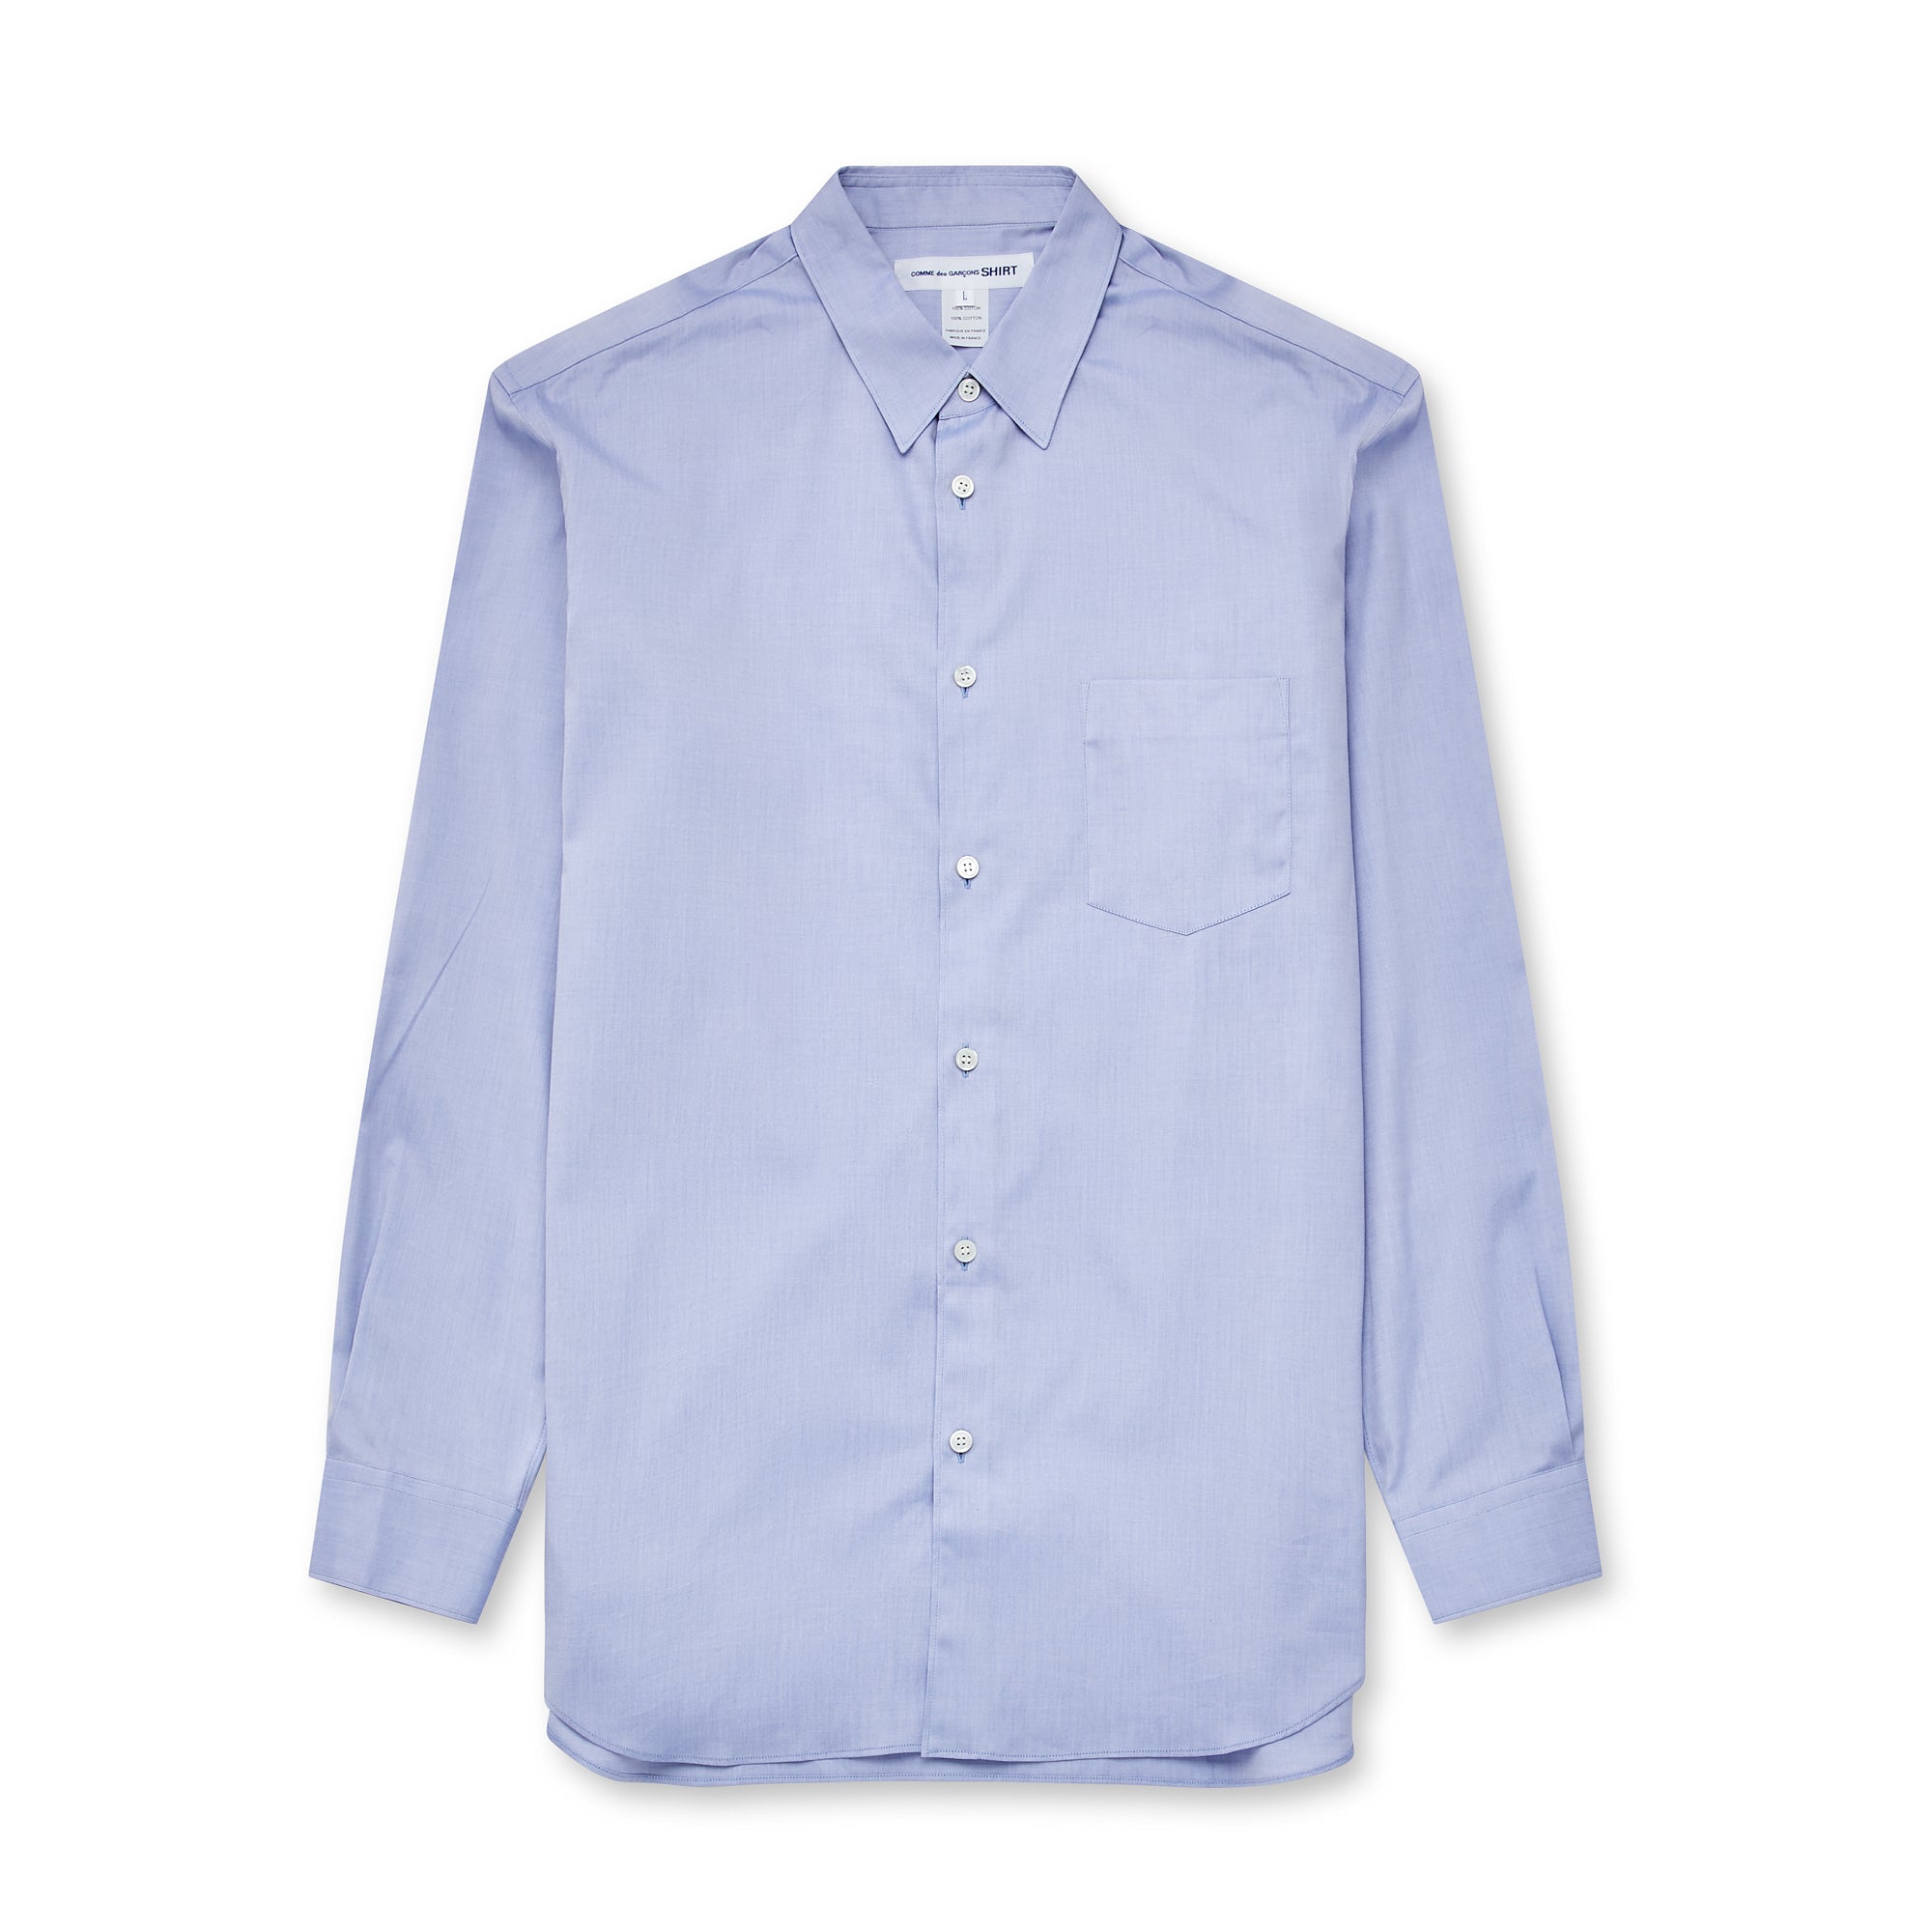 CDG Shirt Forever - Classic Fit Woven Cotton Shirt - (Light Blue) view 1